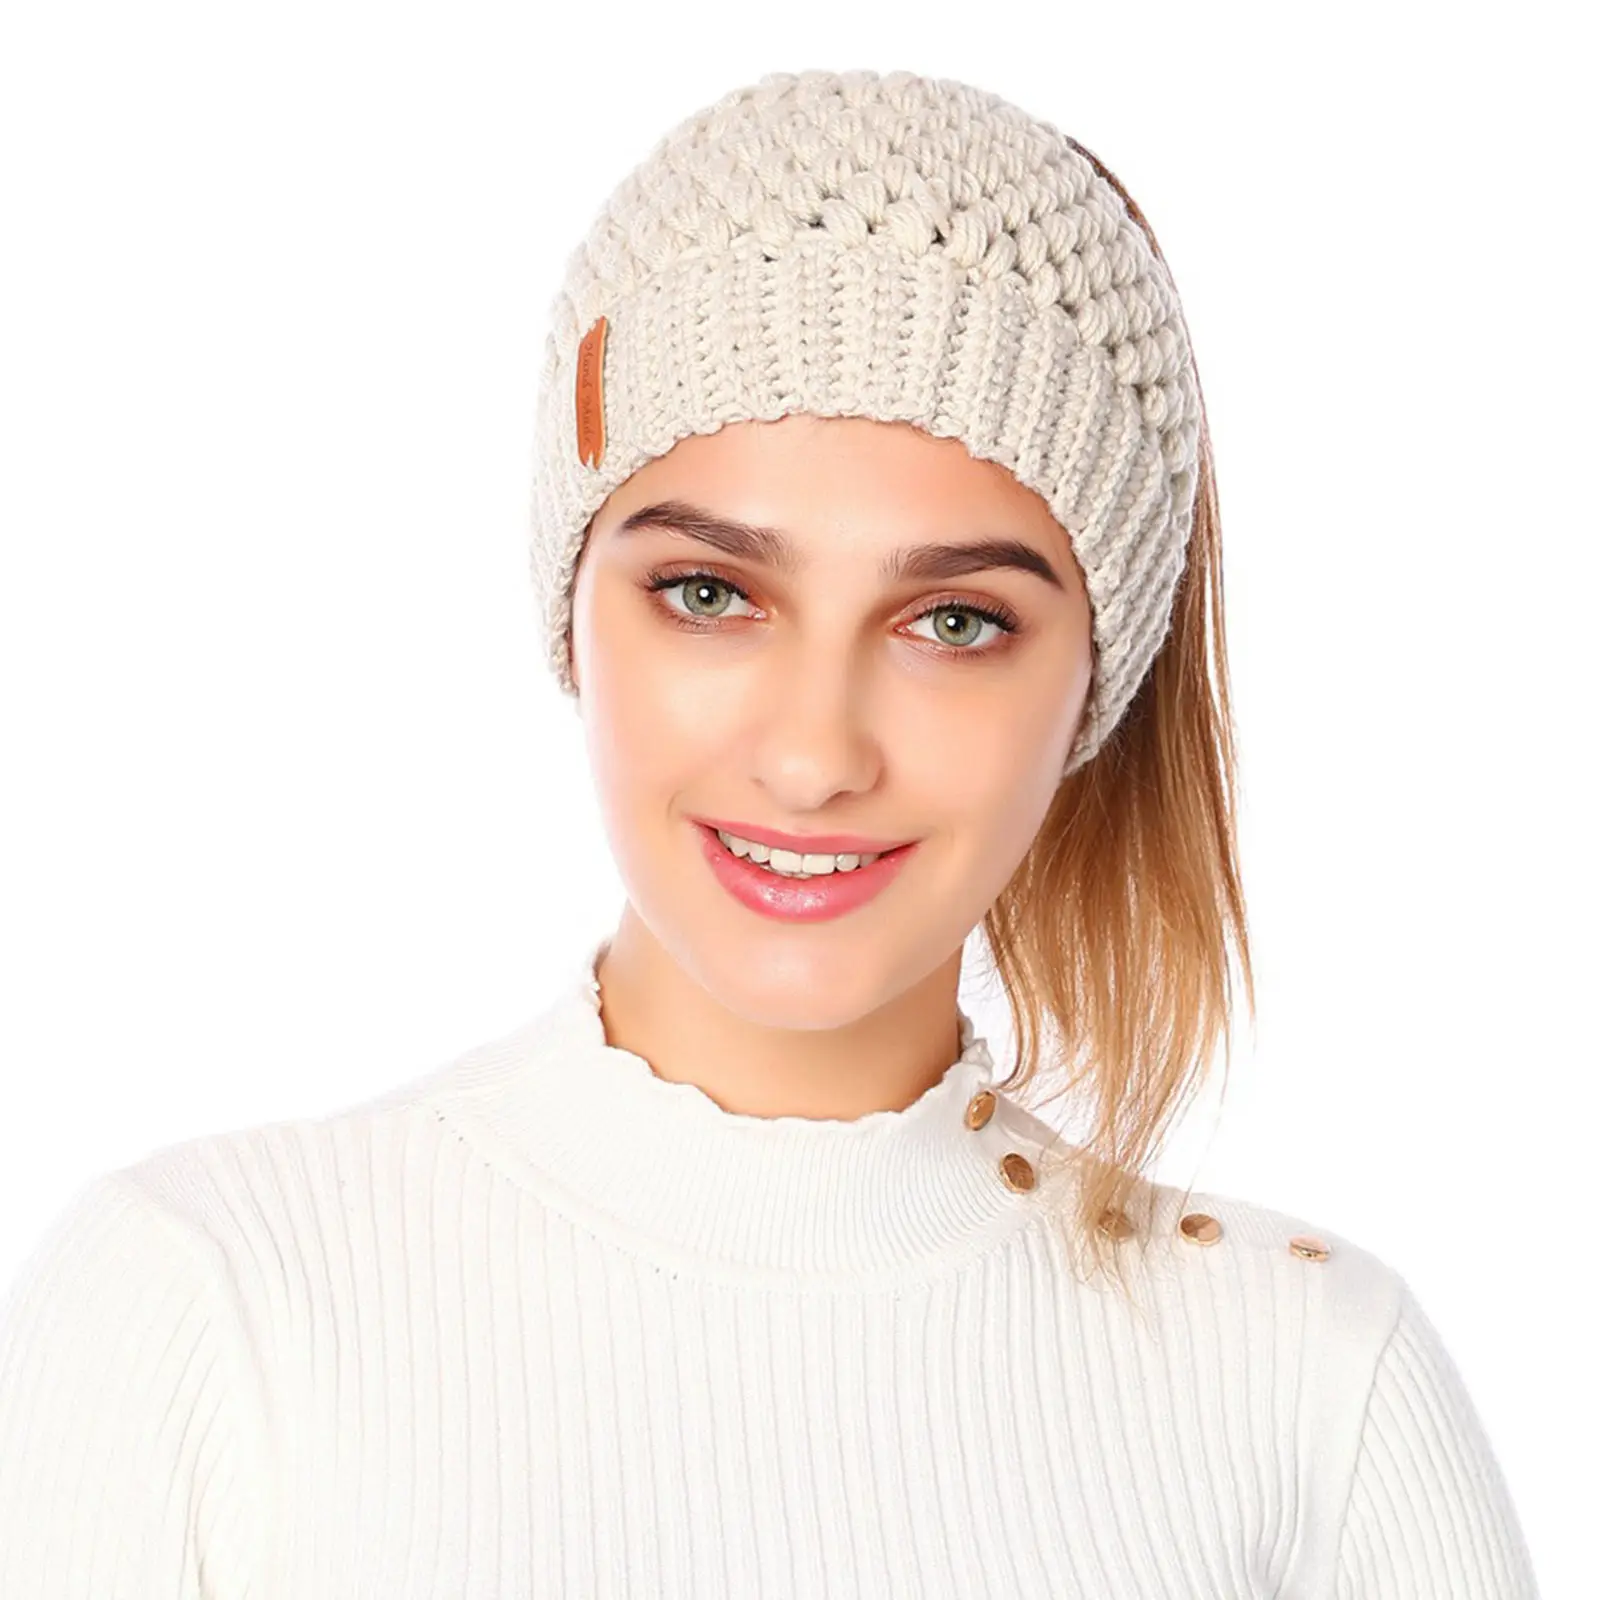 Winter Knitting Hats Warm Women Ladies Girl Stretch Knit Messy Bun Ponytail Beanie Holey Hats Caps for Outdoor Sports